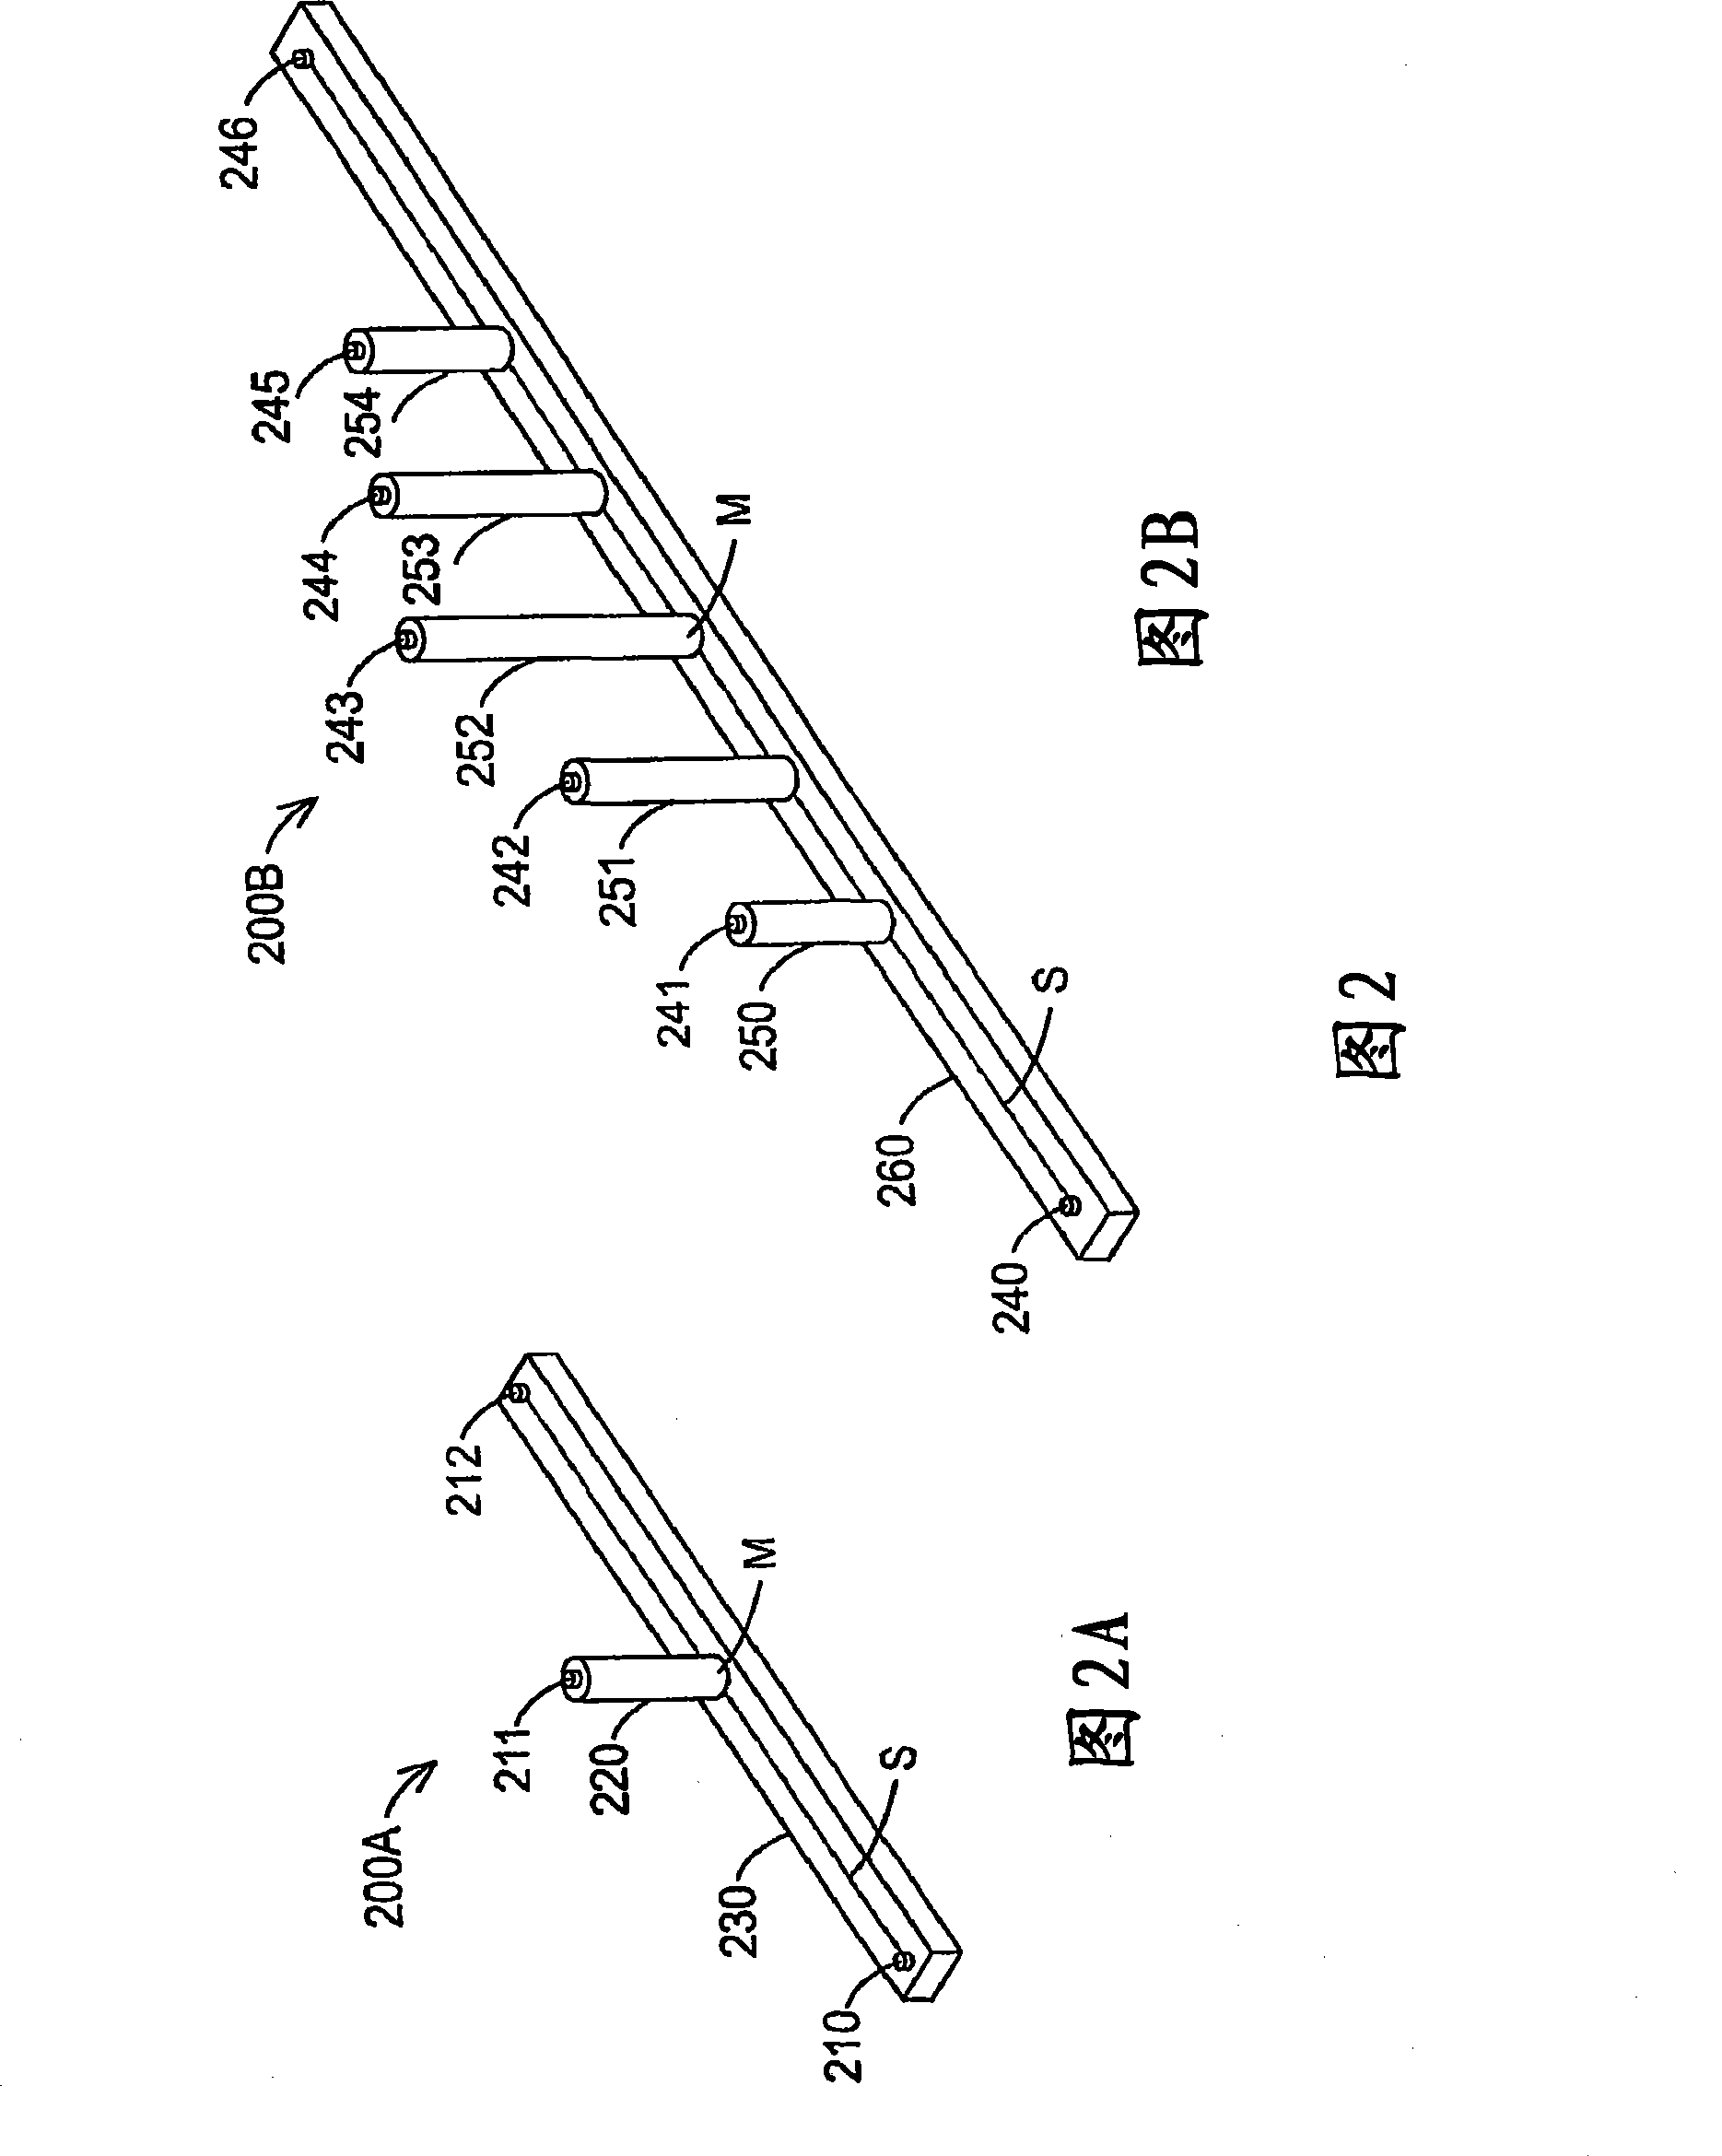 Camera based six degree-of-freedom target measuring and target tracking device with rotatable mirror